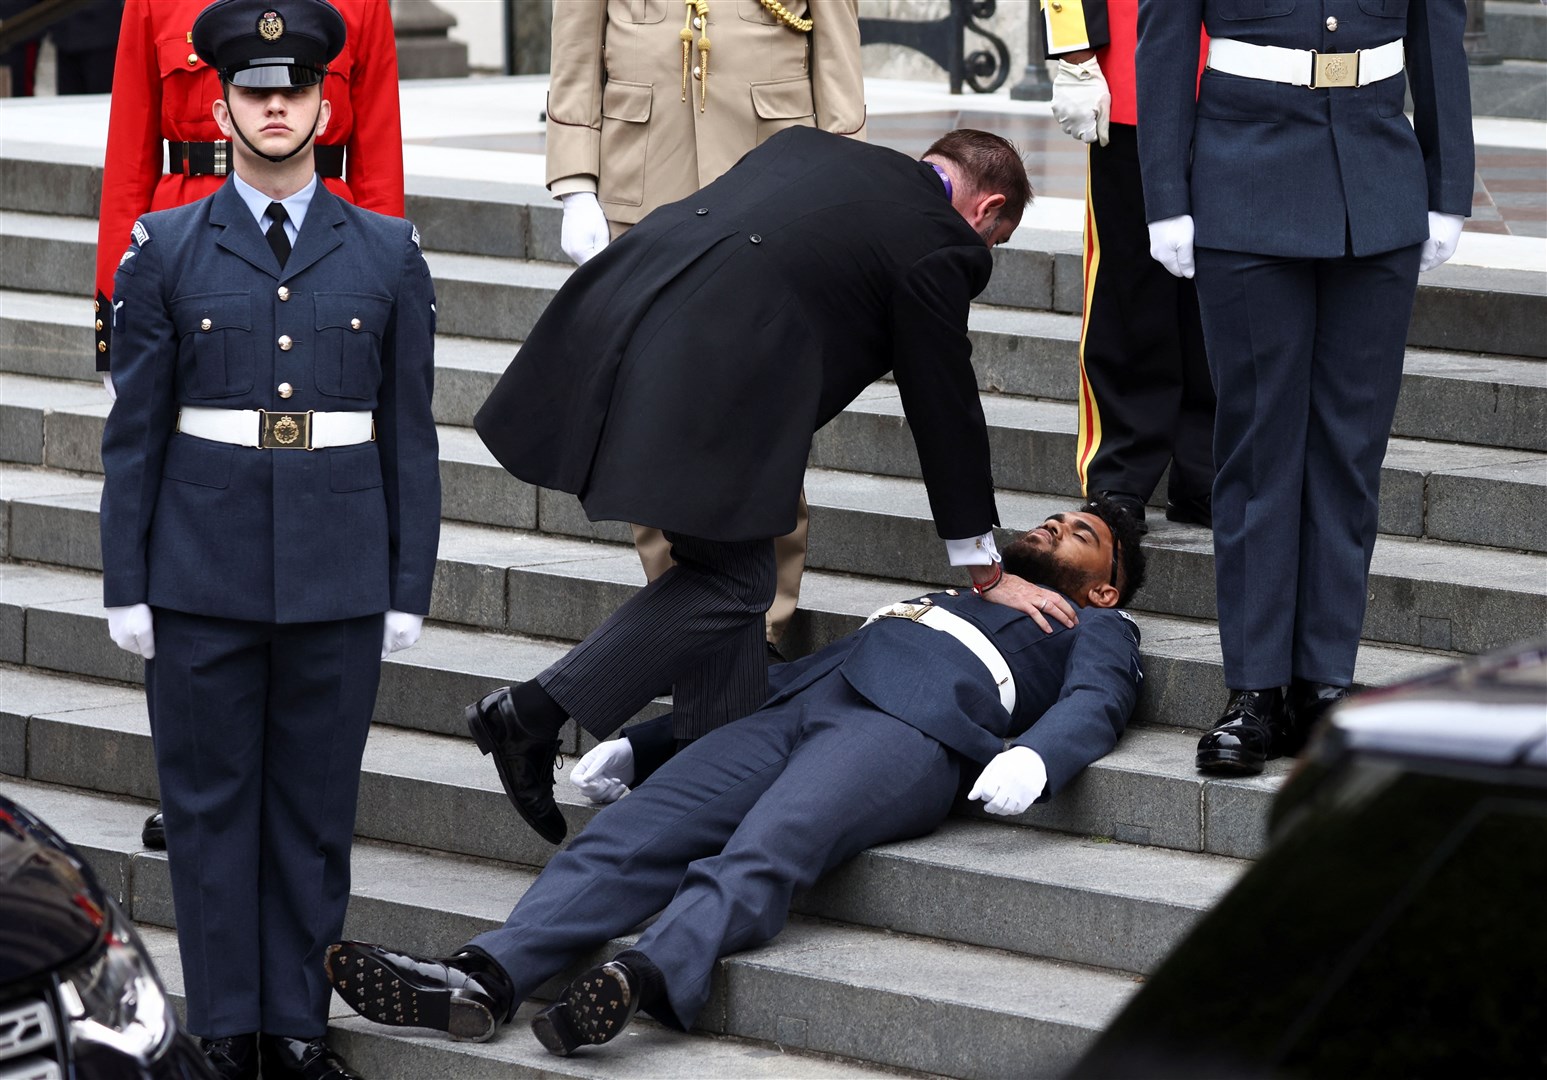 While another guardsman fainted and had to be helped away (Henry Nicholls/PA)